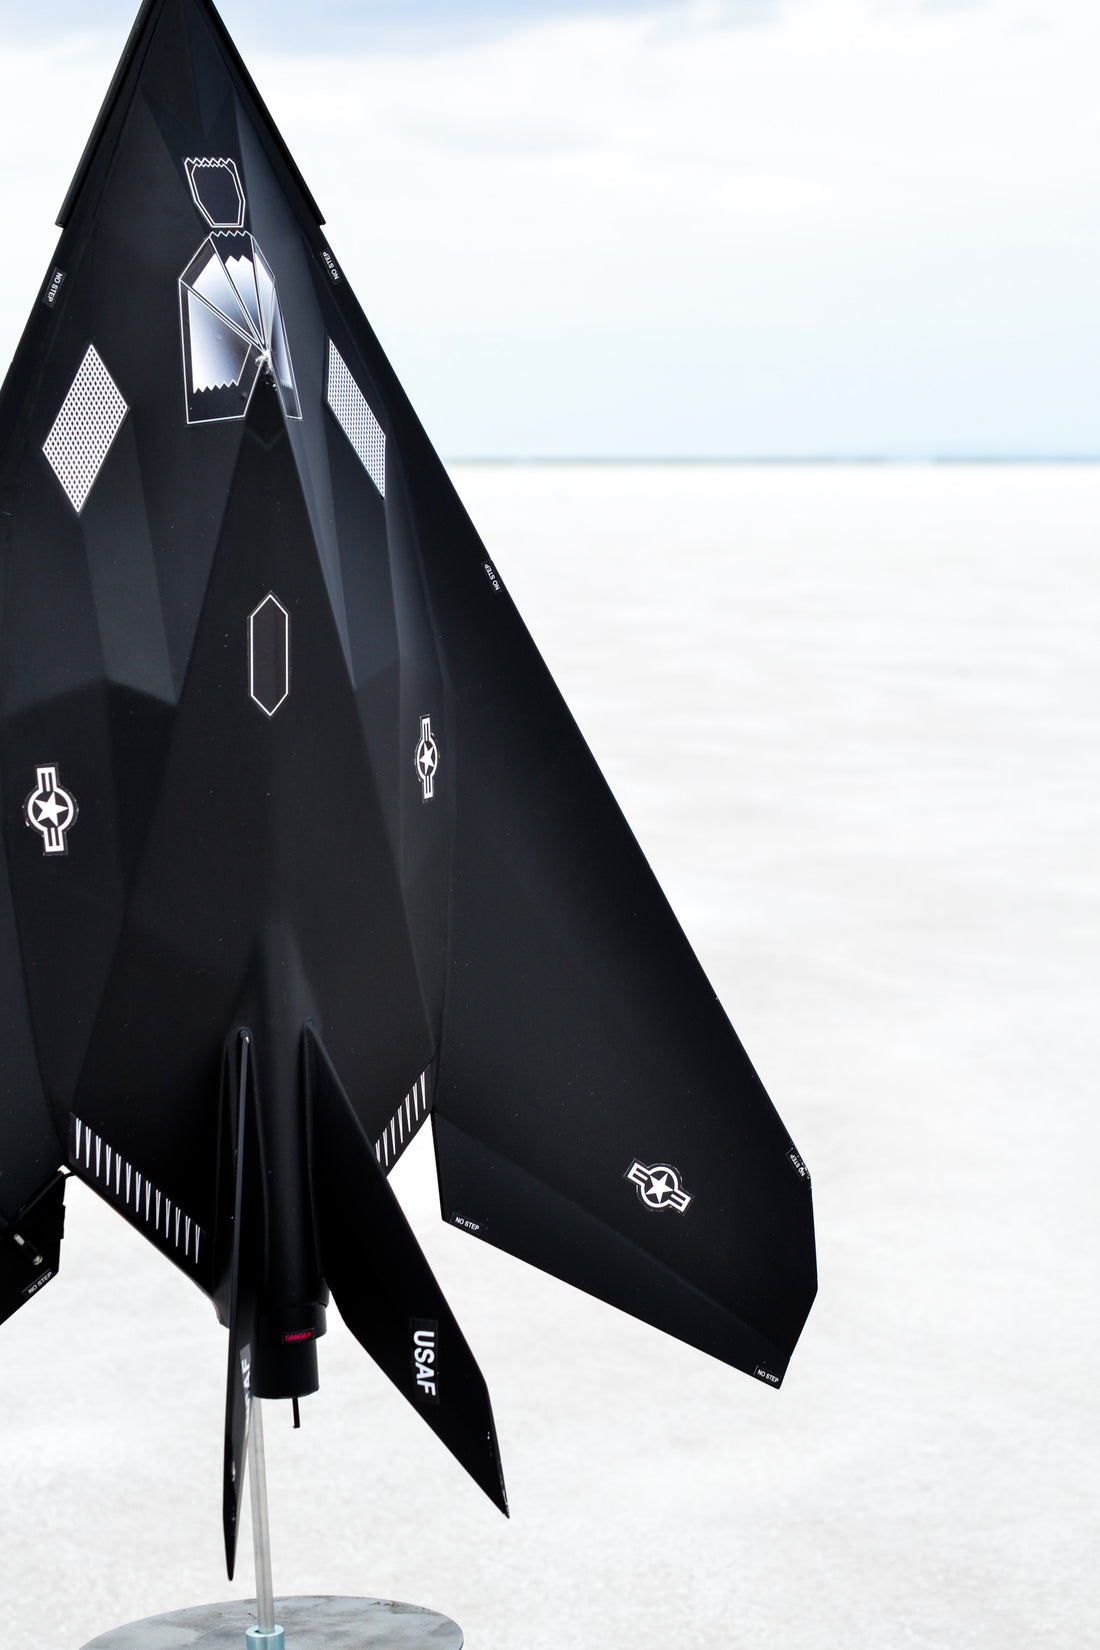 The F-117 Nighthawk has a ship date! It will go out the door July 15!